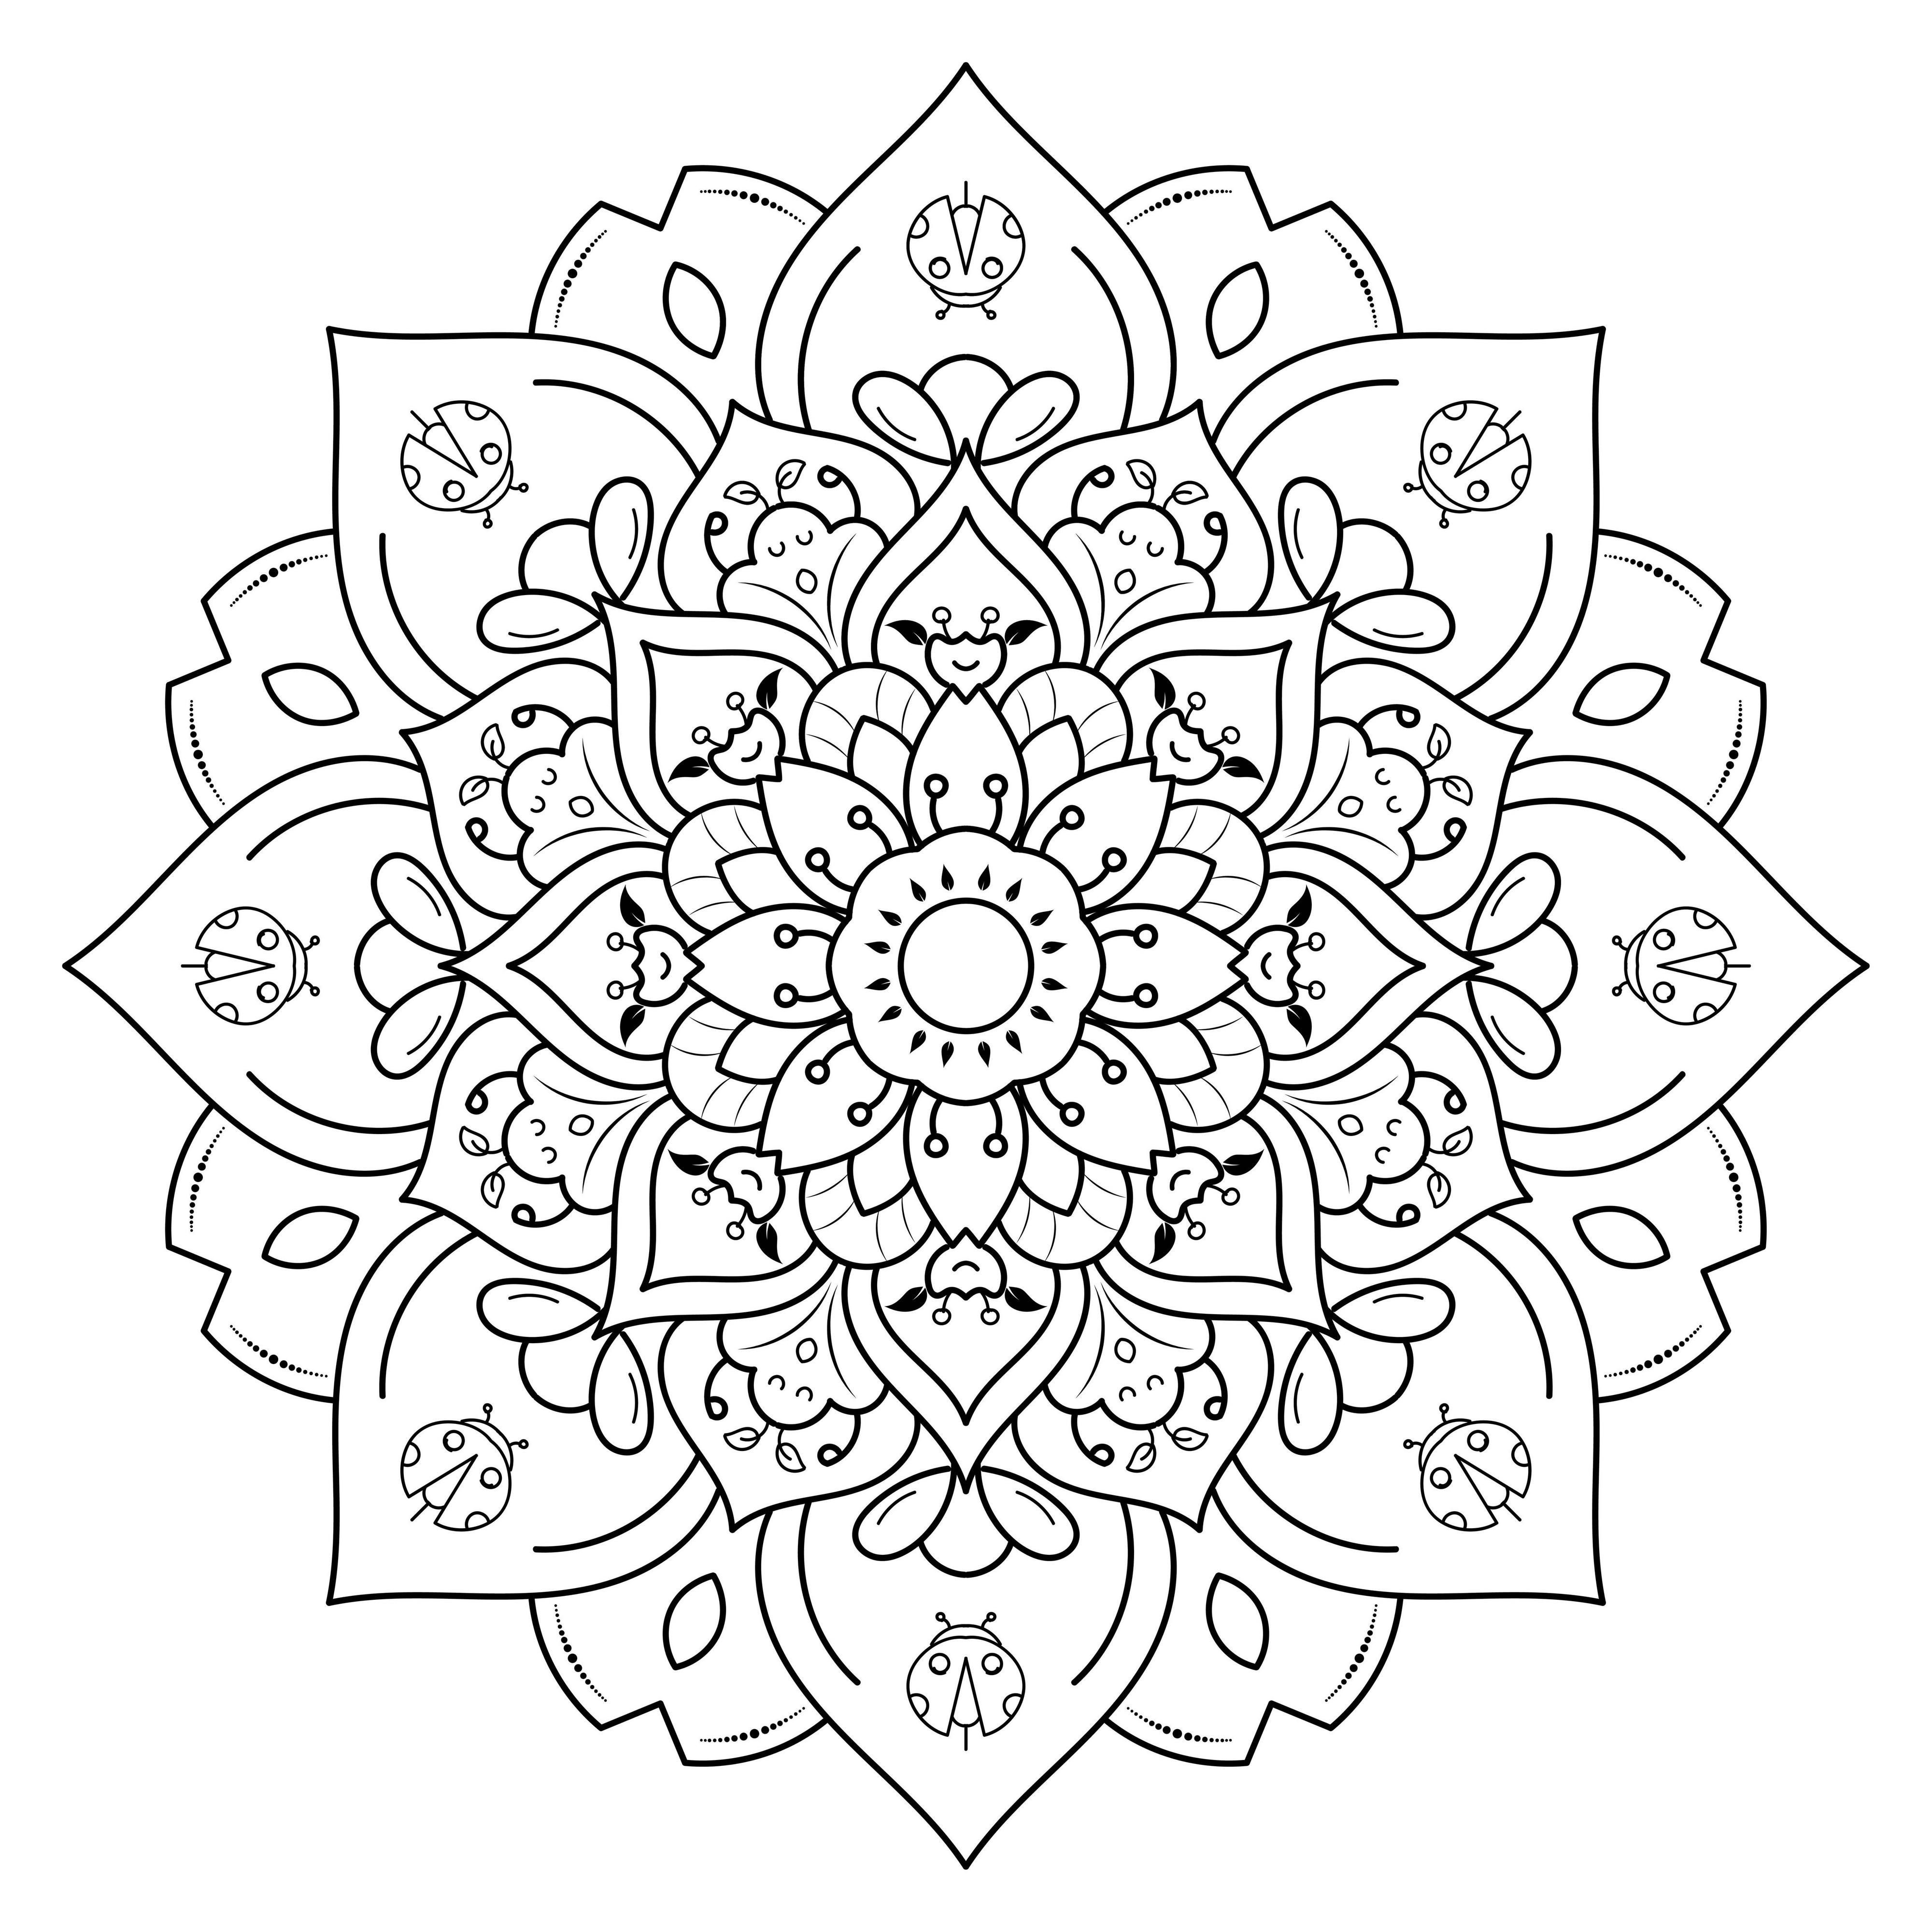 Mandala Coloring Vector Art, Icons, and Graphics for Free Download